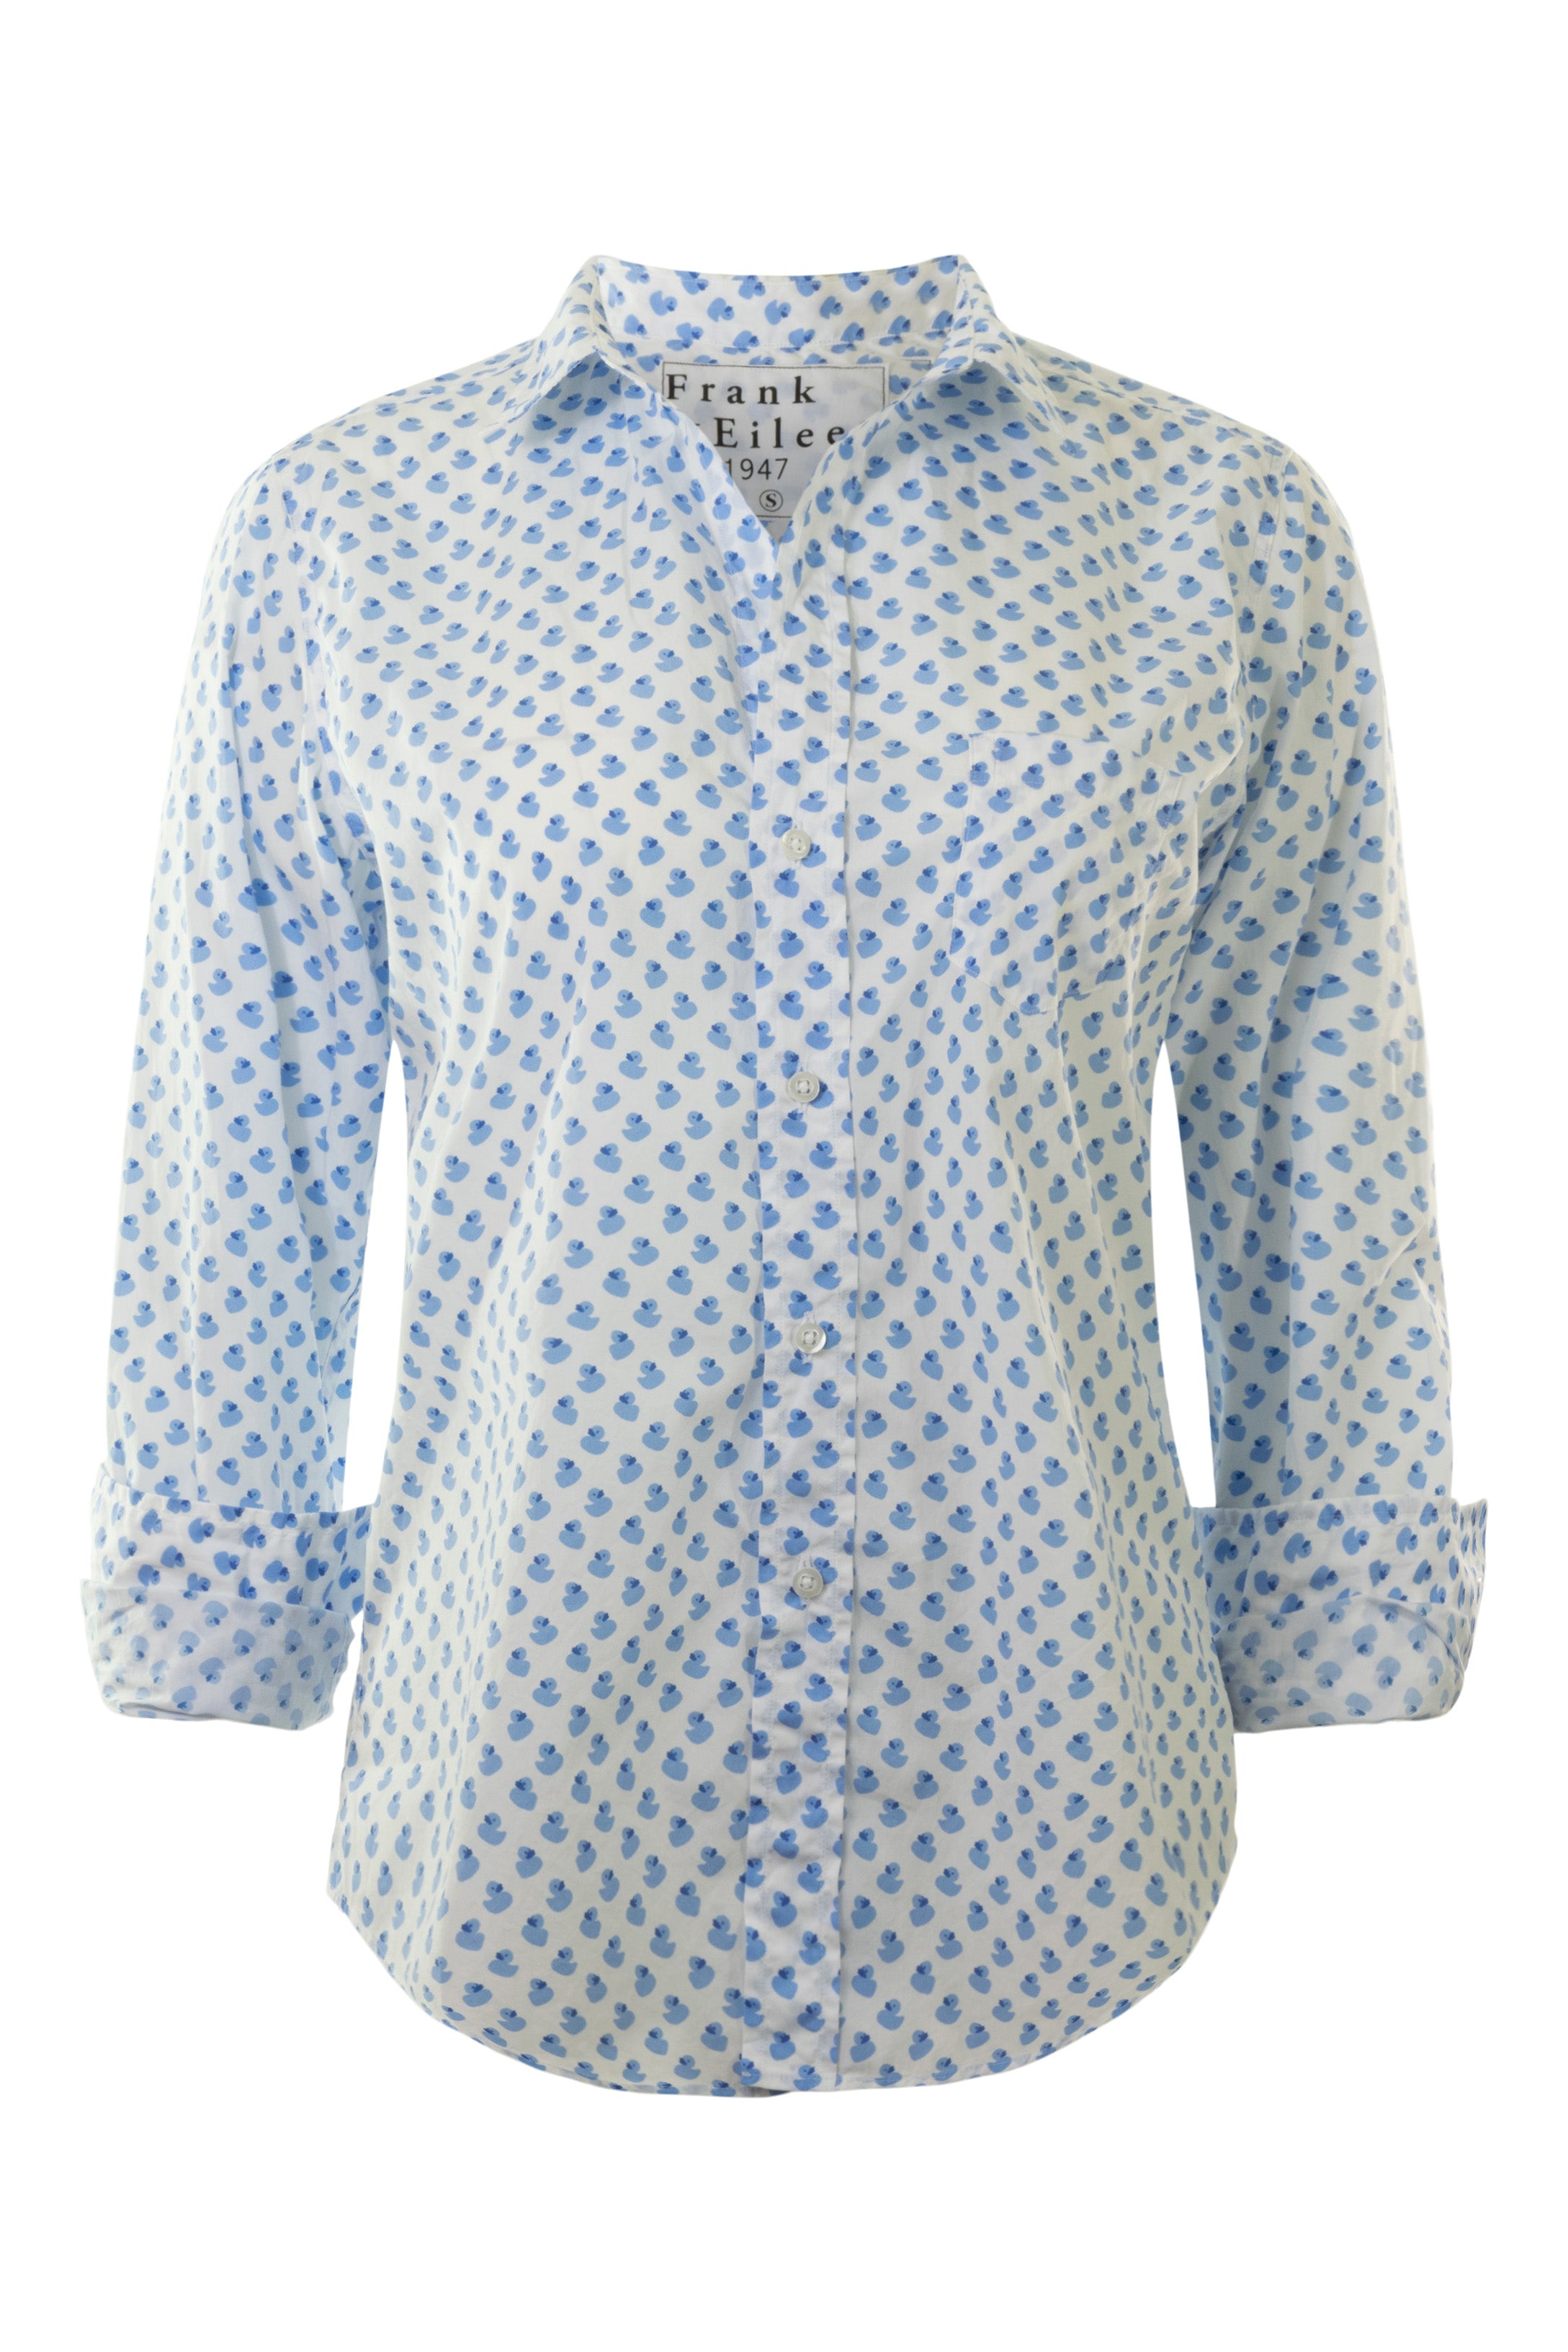 Frank & Eileen Barry Tailored Button Up Shirt in Blue Rubber Duckies